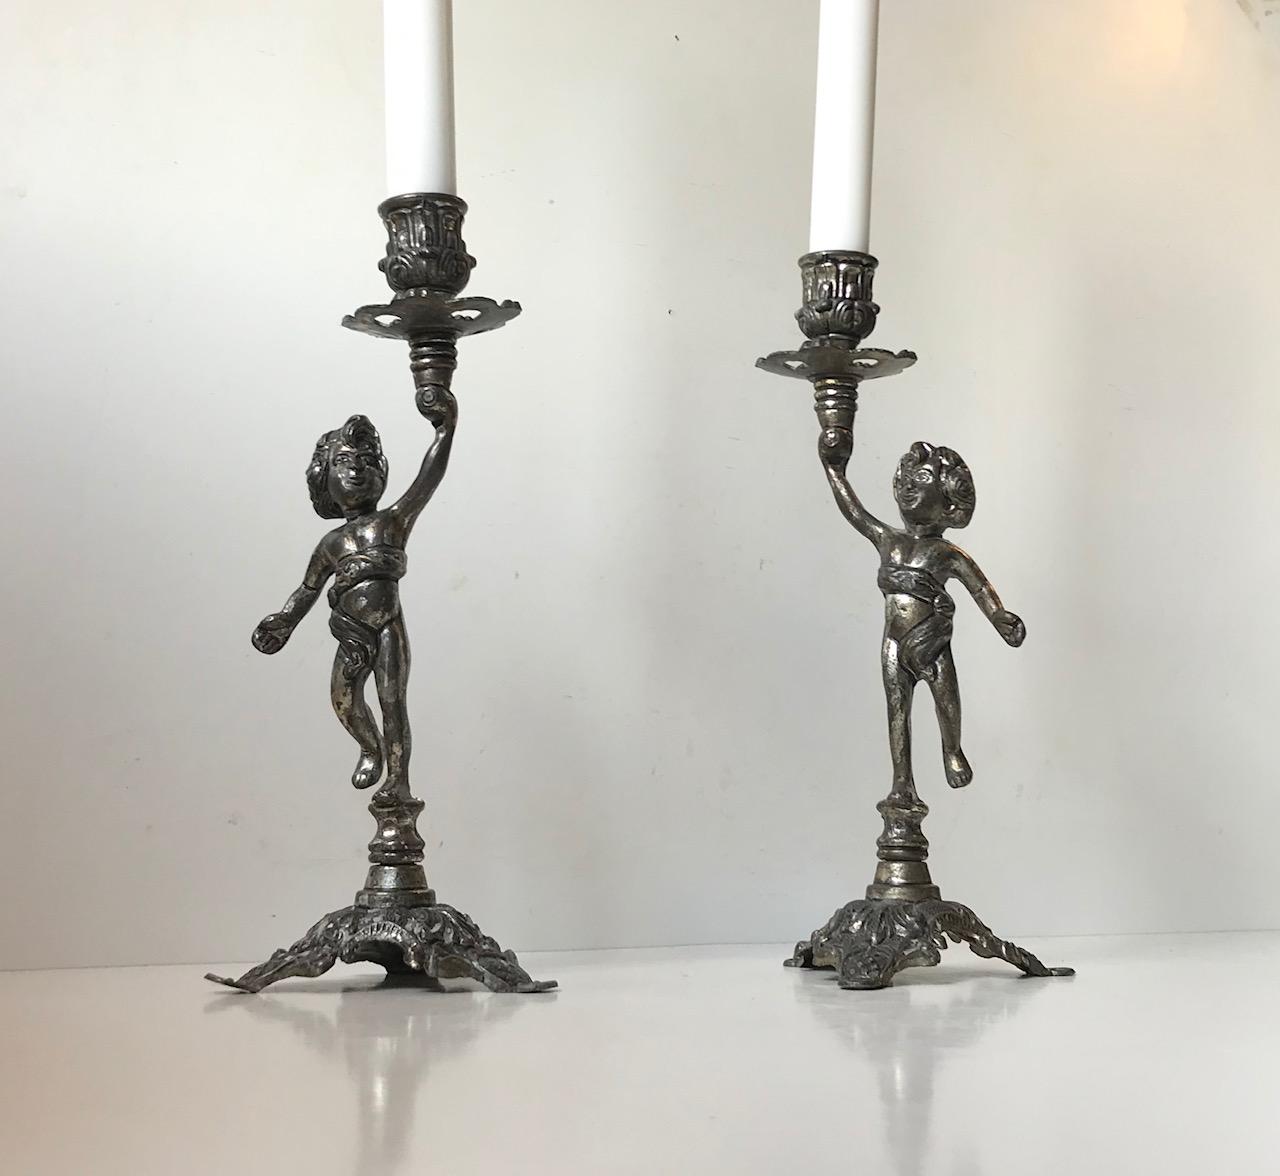 A pair of metal-alloy candlesticks with cherubs. Each cherubs with different facial expression. Manufactured in Italy during the 1940s or 1950s. Both of them stamped: Made in Italy beneath their base. This set uses regular sized candles.